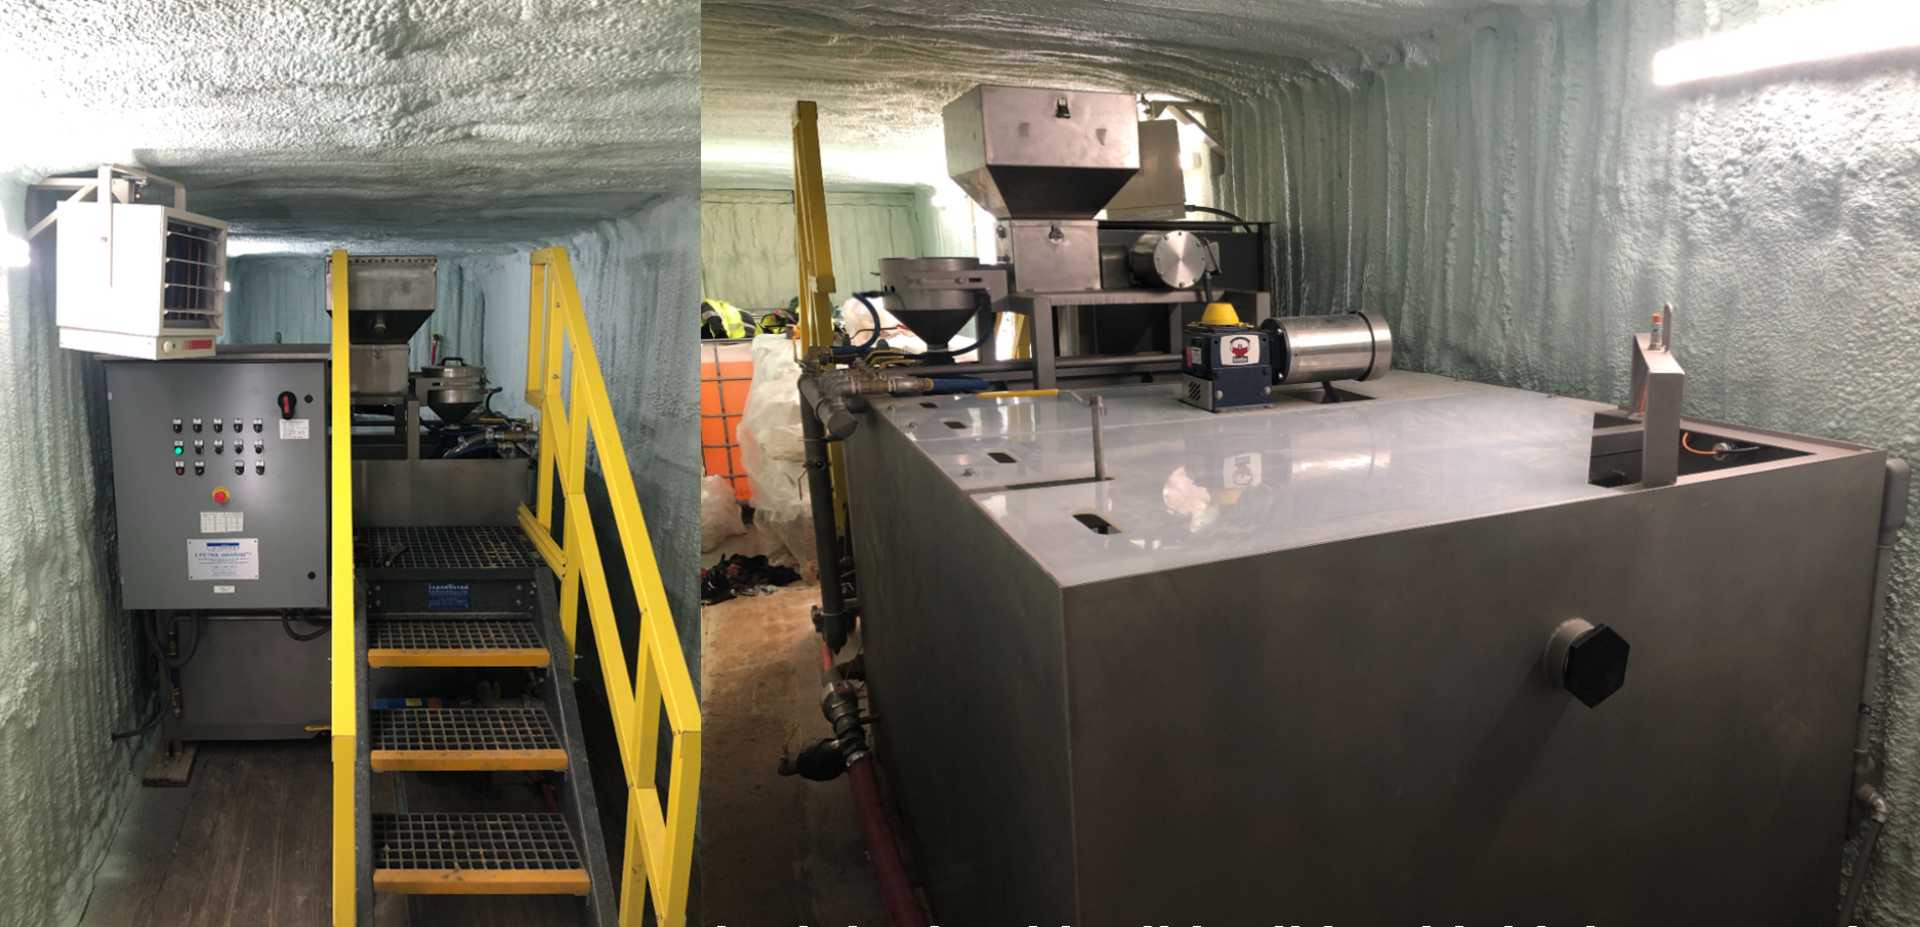 An image with side by side photos showing the front and back of a stainless steel polymer make-down system in a shipping container.